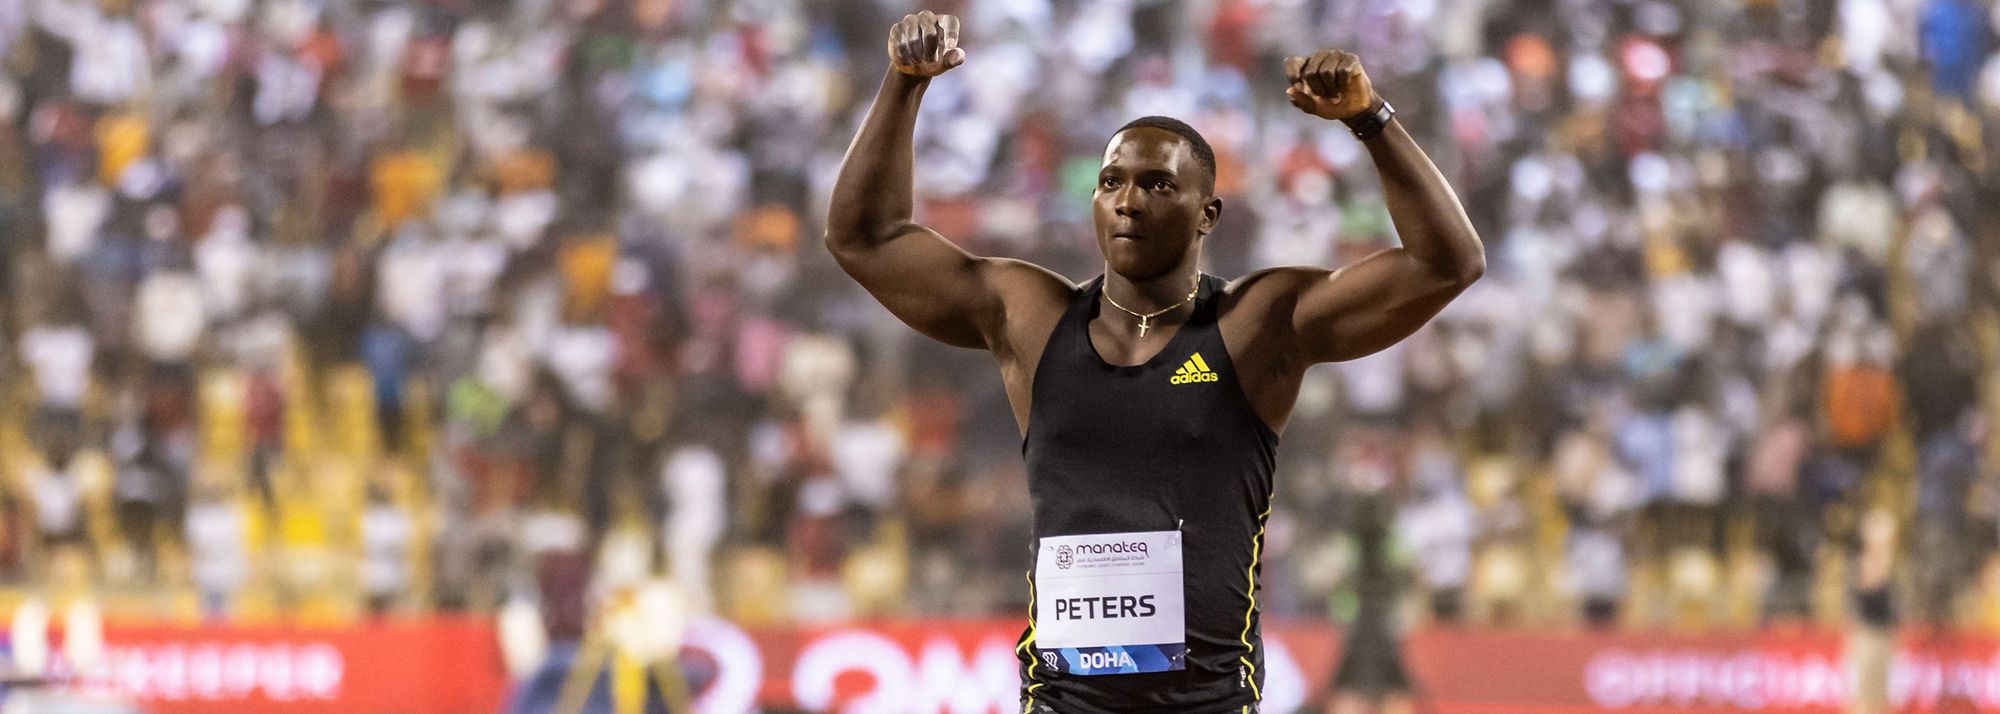 Fresh from his 93.07m throw in Doha, Anderson Peters will renew his javelin rivalry with Johannes Vetter, Jakub Vadlejch, Vitezslav Vesely and Keshorn Walcott.